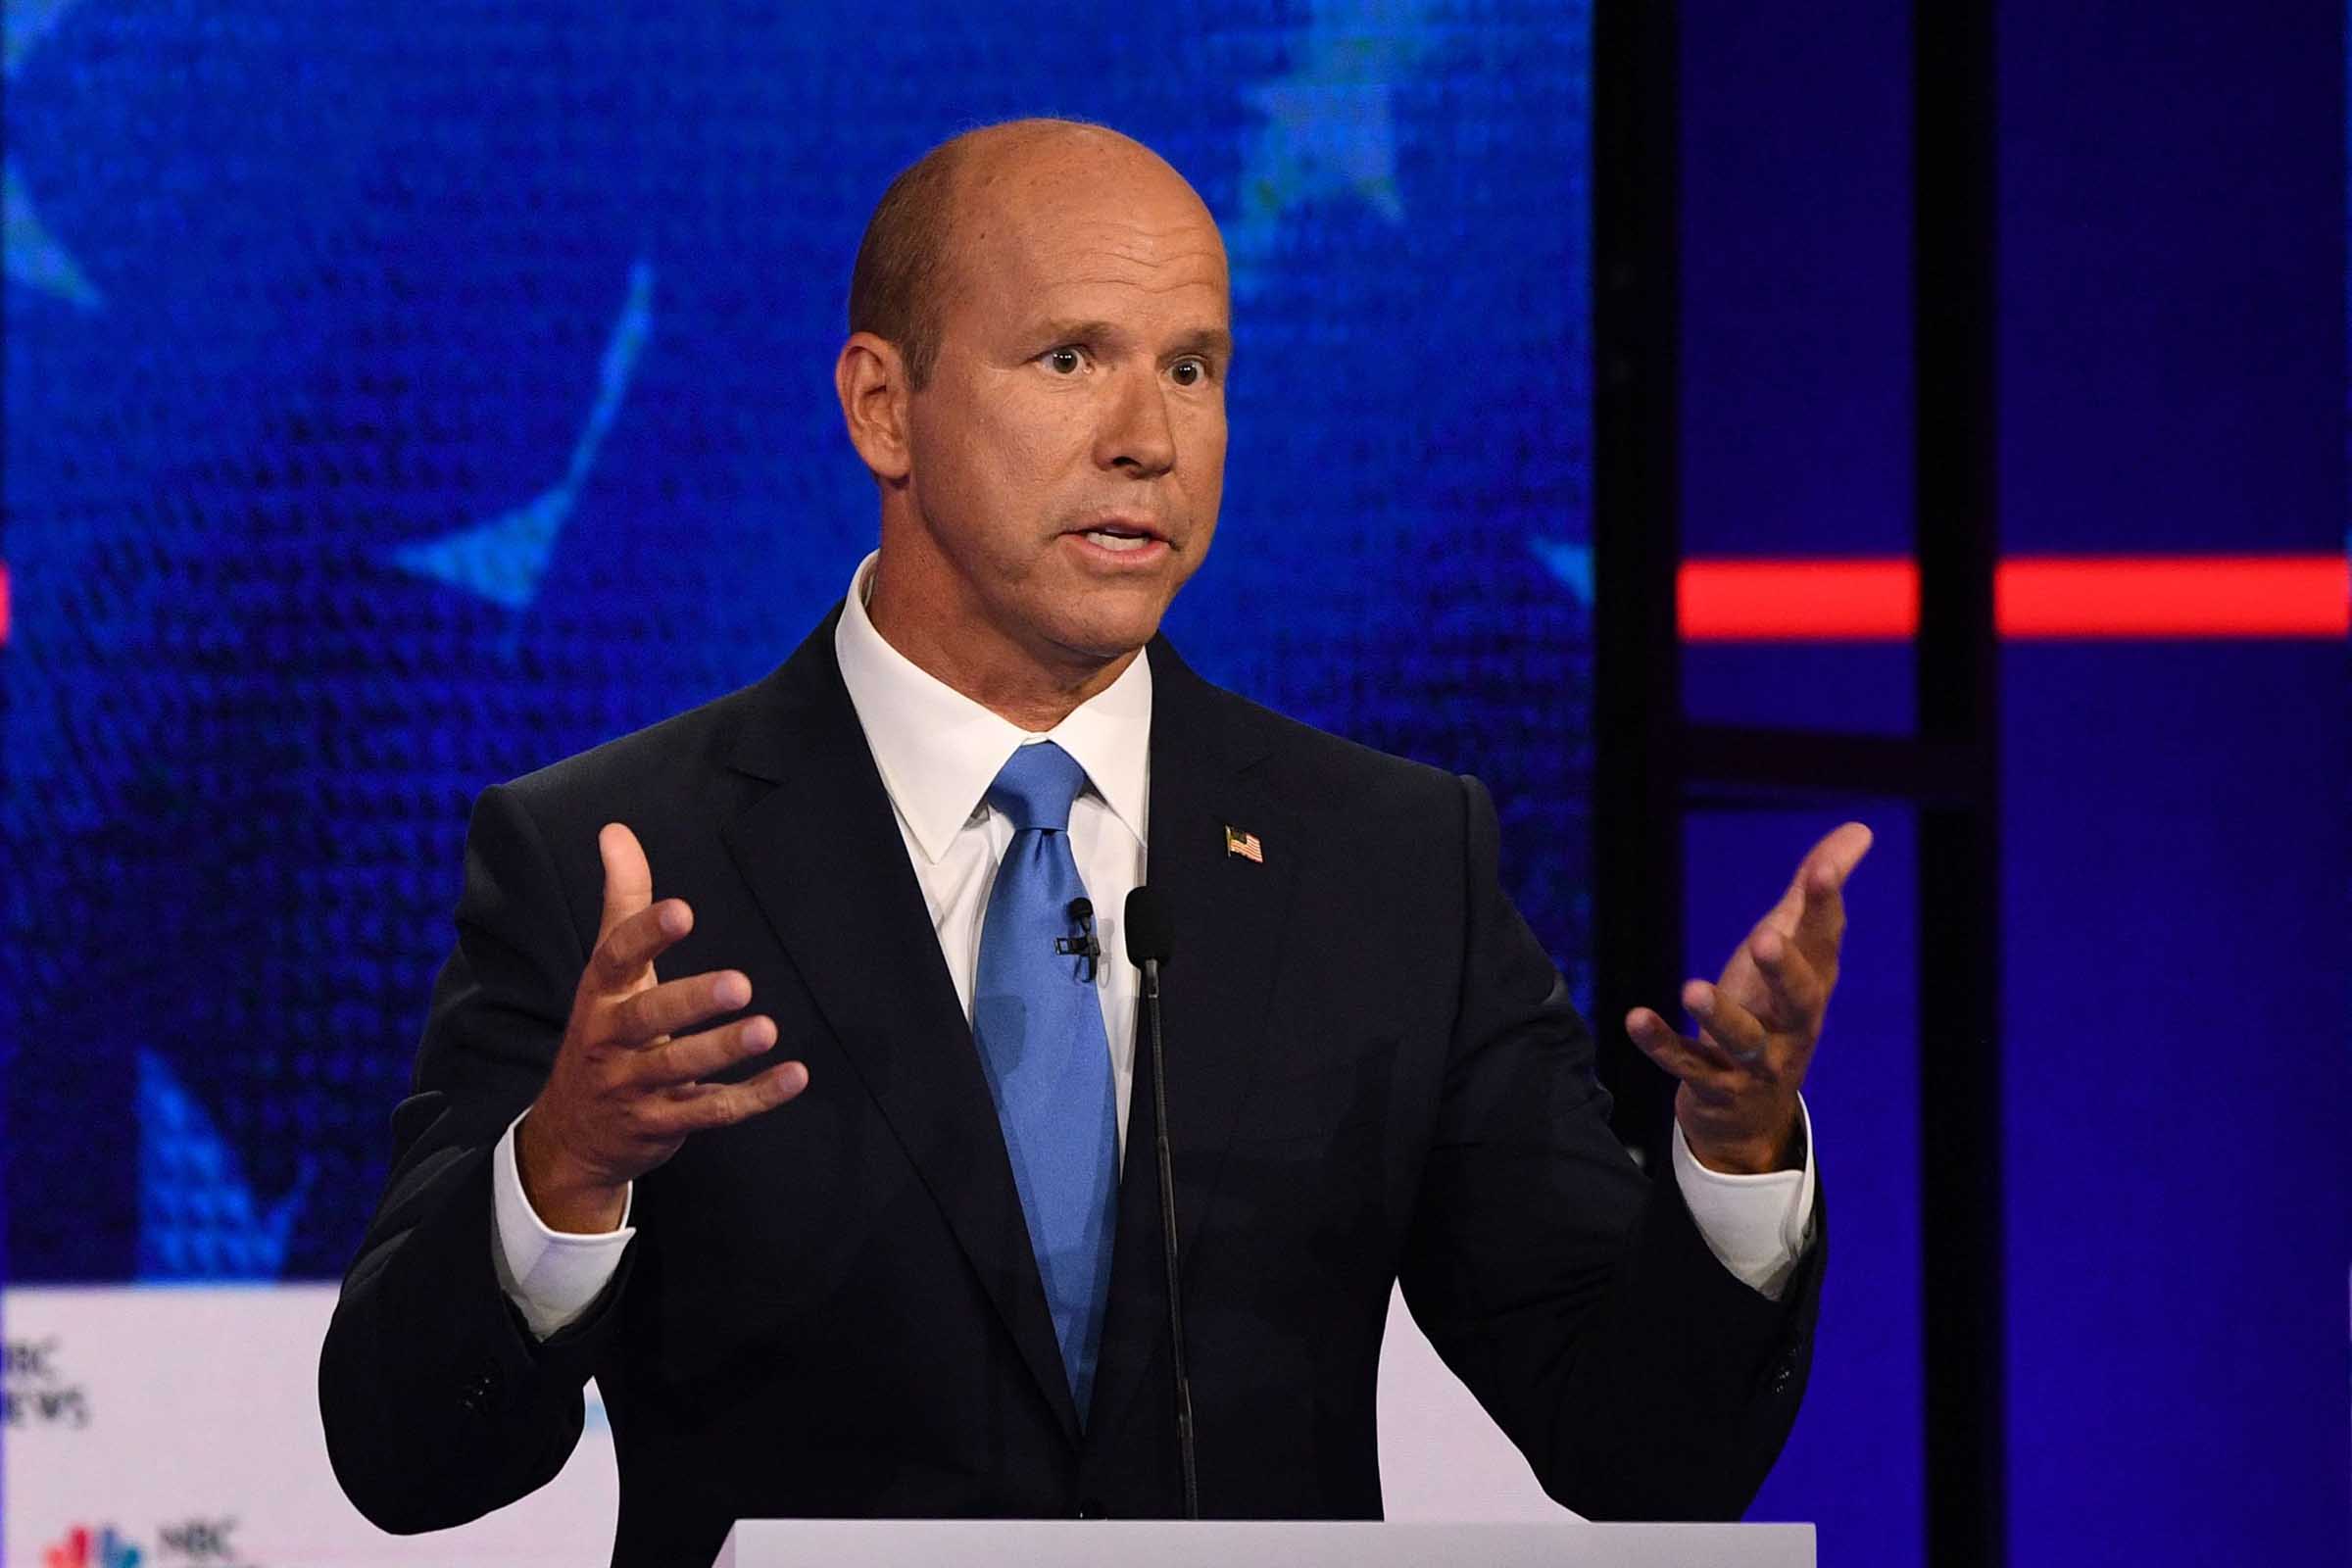 Democratic presidential hopeful former US Representative for Maryland's 6th congressional district John Delaney gestures as he speaks during the first Democratic primary debate of the 2020 presidential campaign season hosted by NBC News at the Adrienne Arsht Center for the Performing Arts in Miami, Florida, June 26, 2019. (Jim Watson—AFP/Getty Images)